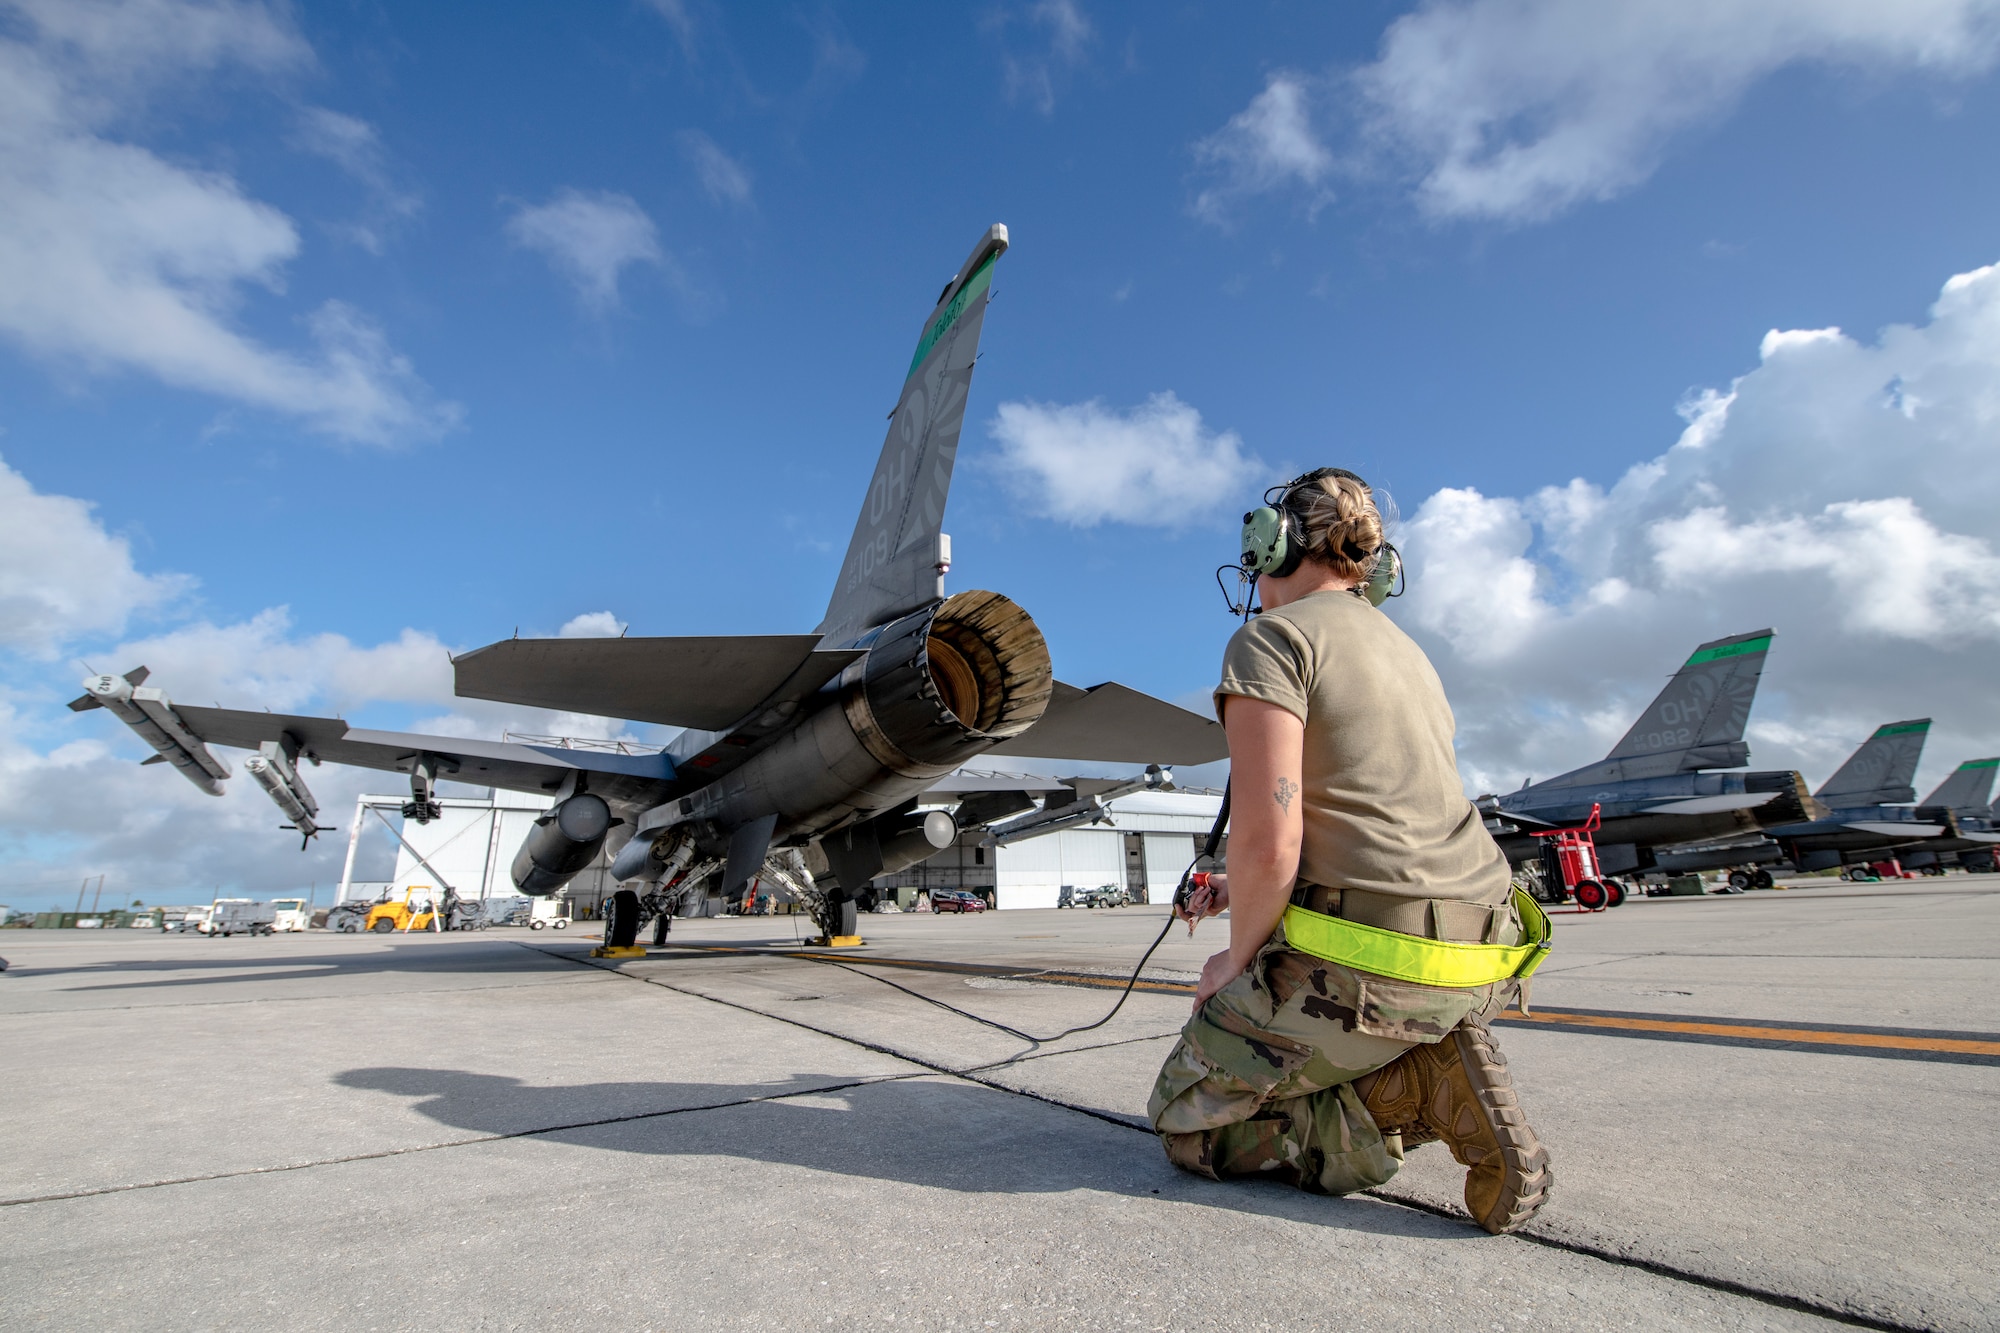 U.S. Air Force Staff Sgt. Jennifer Price, an F-16 crew chief assigned to the Ohio National Guard's 180th Fighter Wing, launches an F-16 Fighting Falcon for a training flight at Naval Air Station Key West, Florida, Nov. 1, 2022. The 180FW deployed to Key West to train with VFC-111, the Navy's premier adversary squadron.

*Some photographic elements have been blurred for security purposes